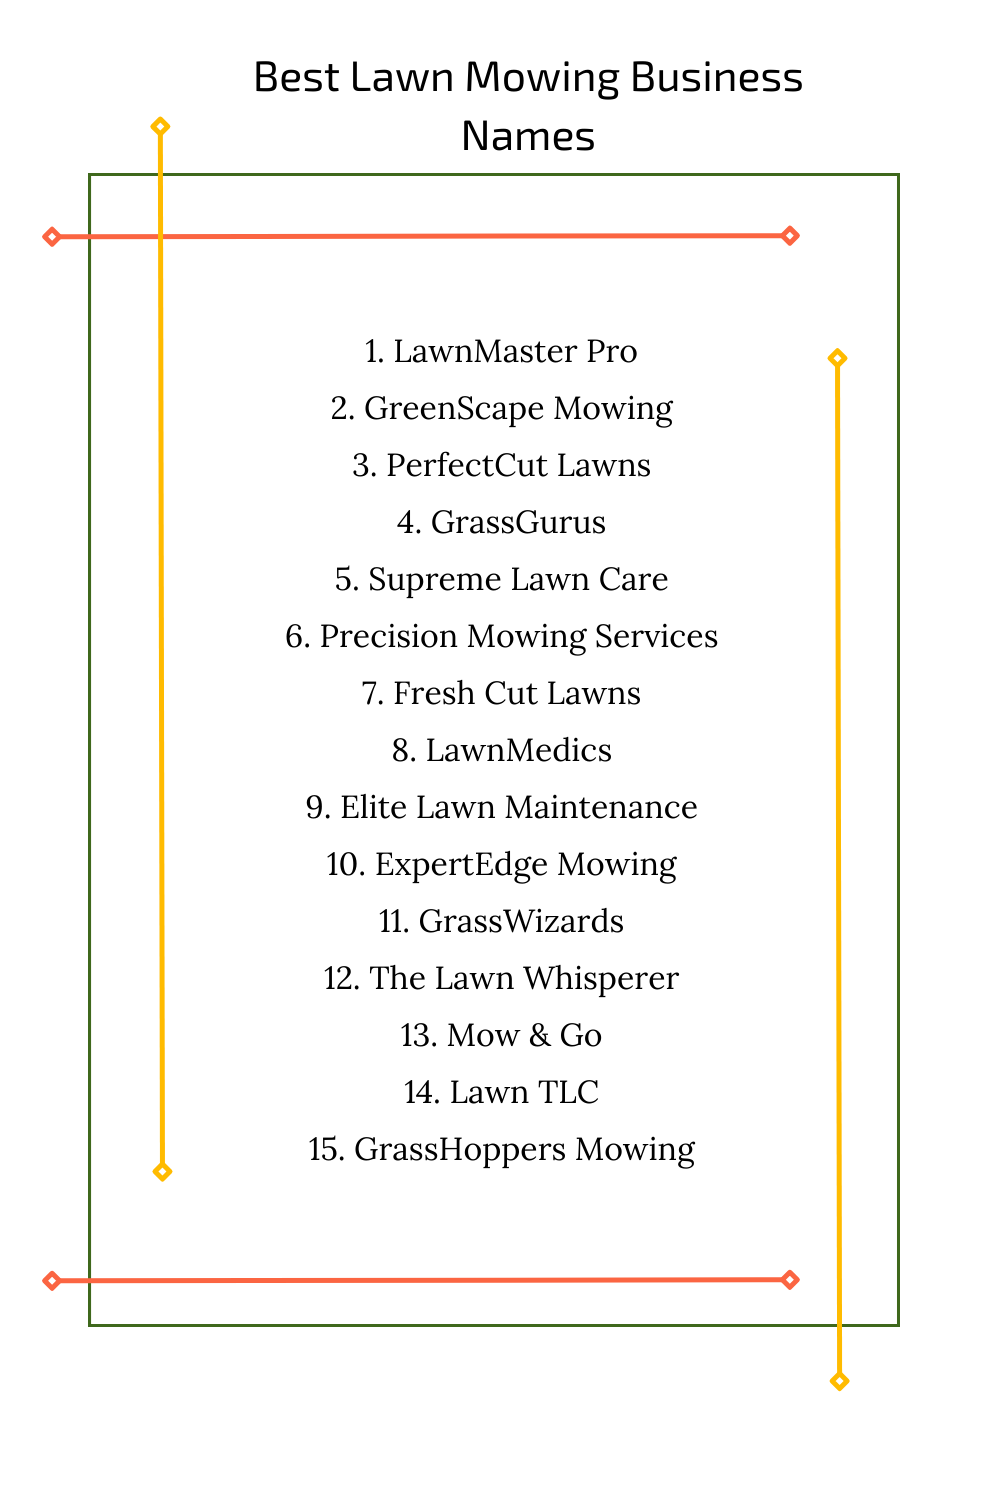 Best Lawn Mowing Business Names